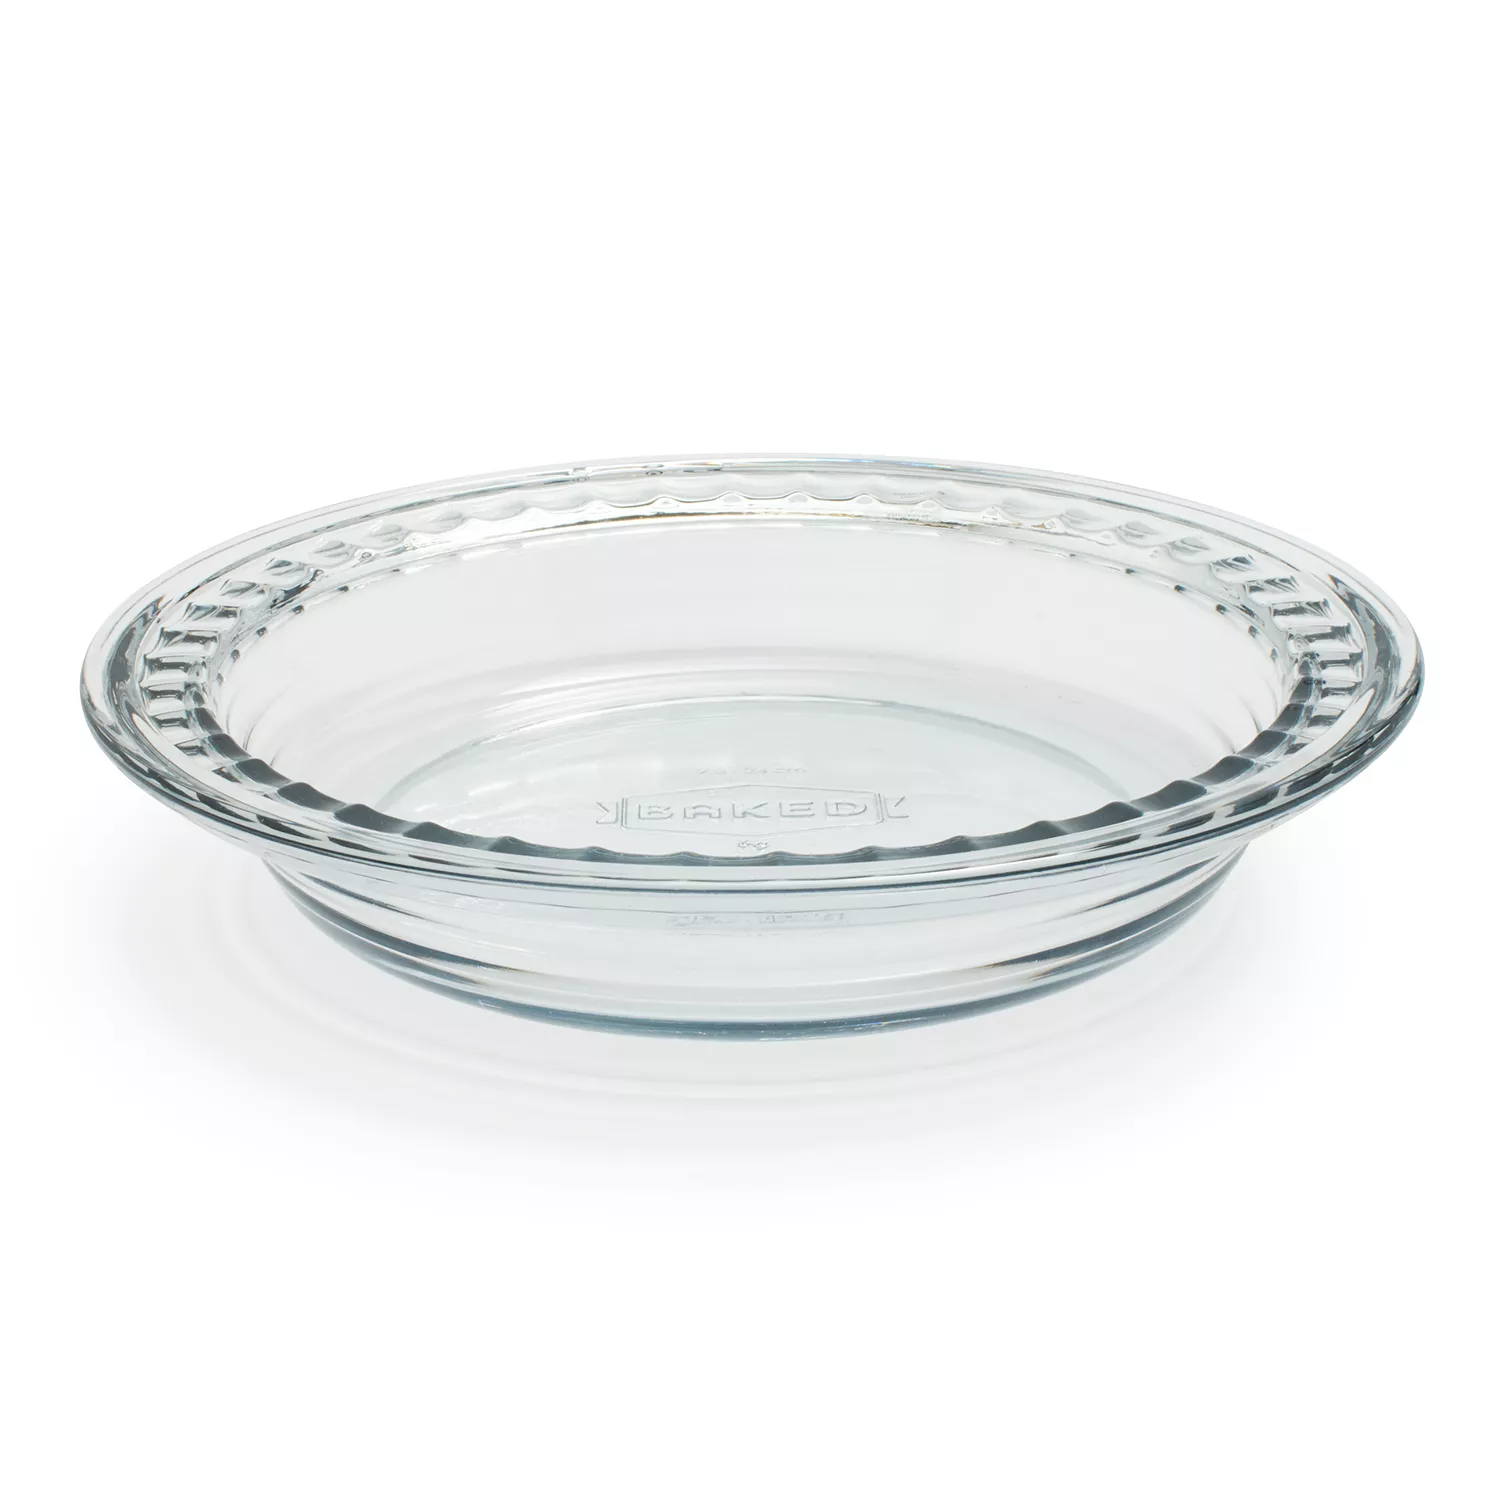 Baked by FireKing Fluted Glass Pie Dish